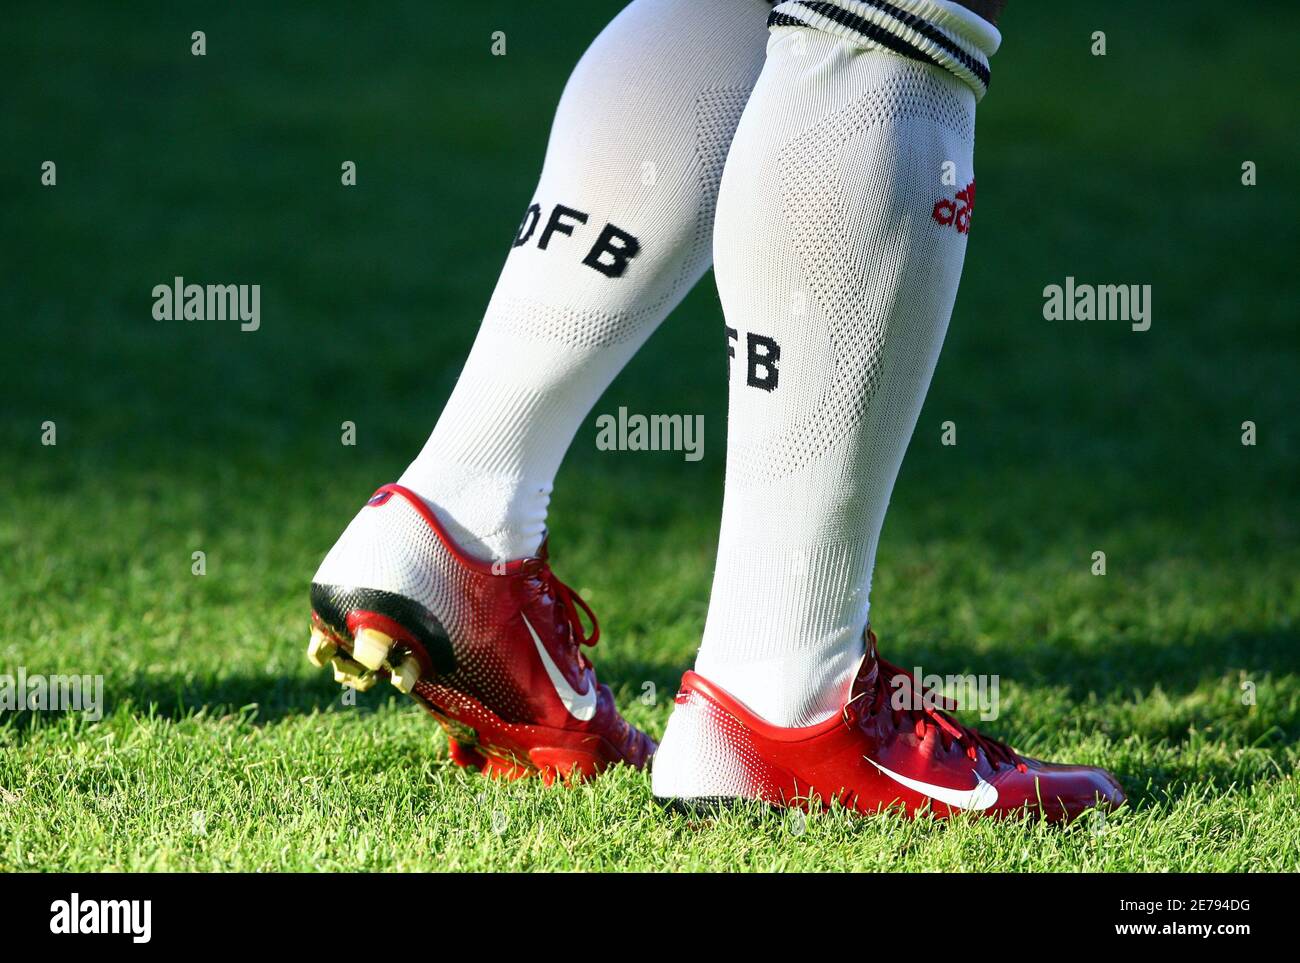 David Odonkor's Nike shoes are pictured during a German national soccer  team training session in the southern German city of Stuttgart September 1,  2006. Germany will face Ireland for their qualification match